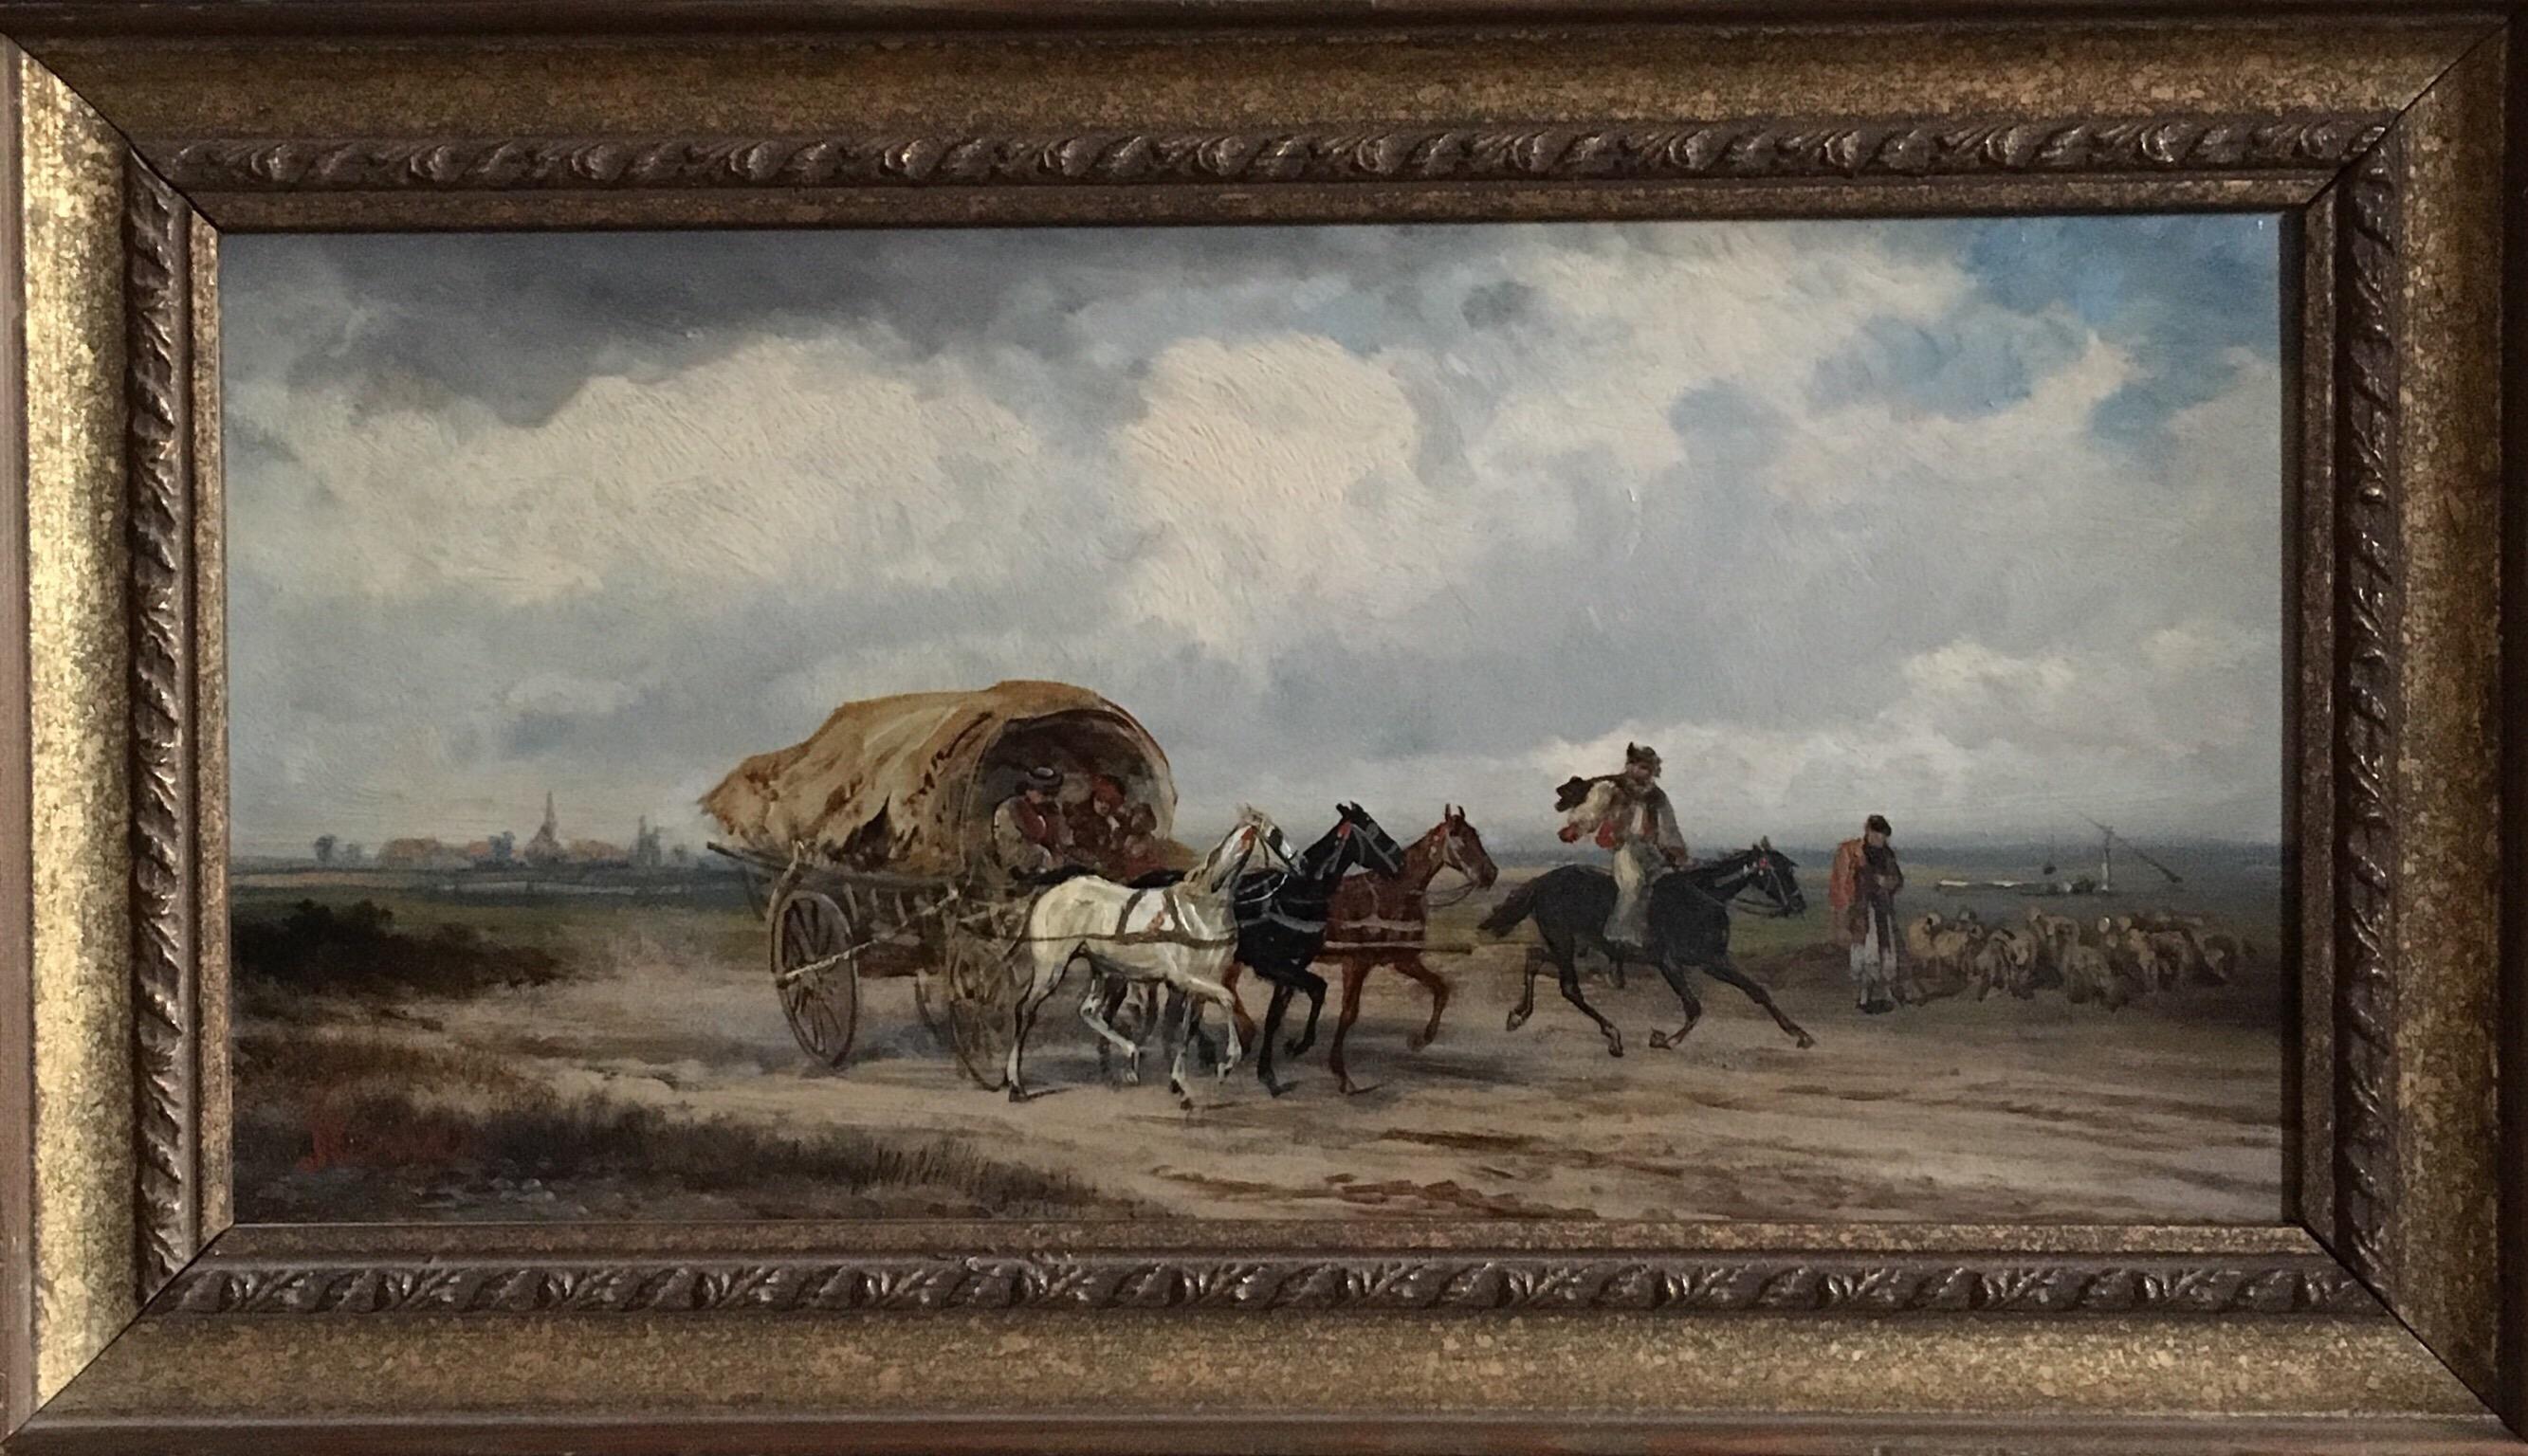 RUDOLF STONE Landscape Painting - Western Travellers, Signed Victorian Oil Painting, Horses